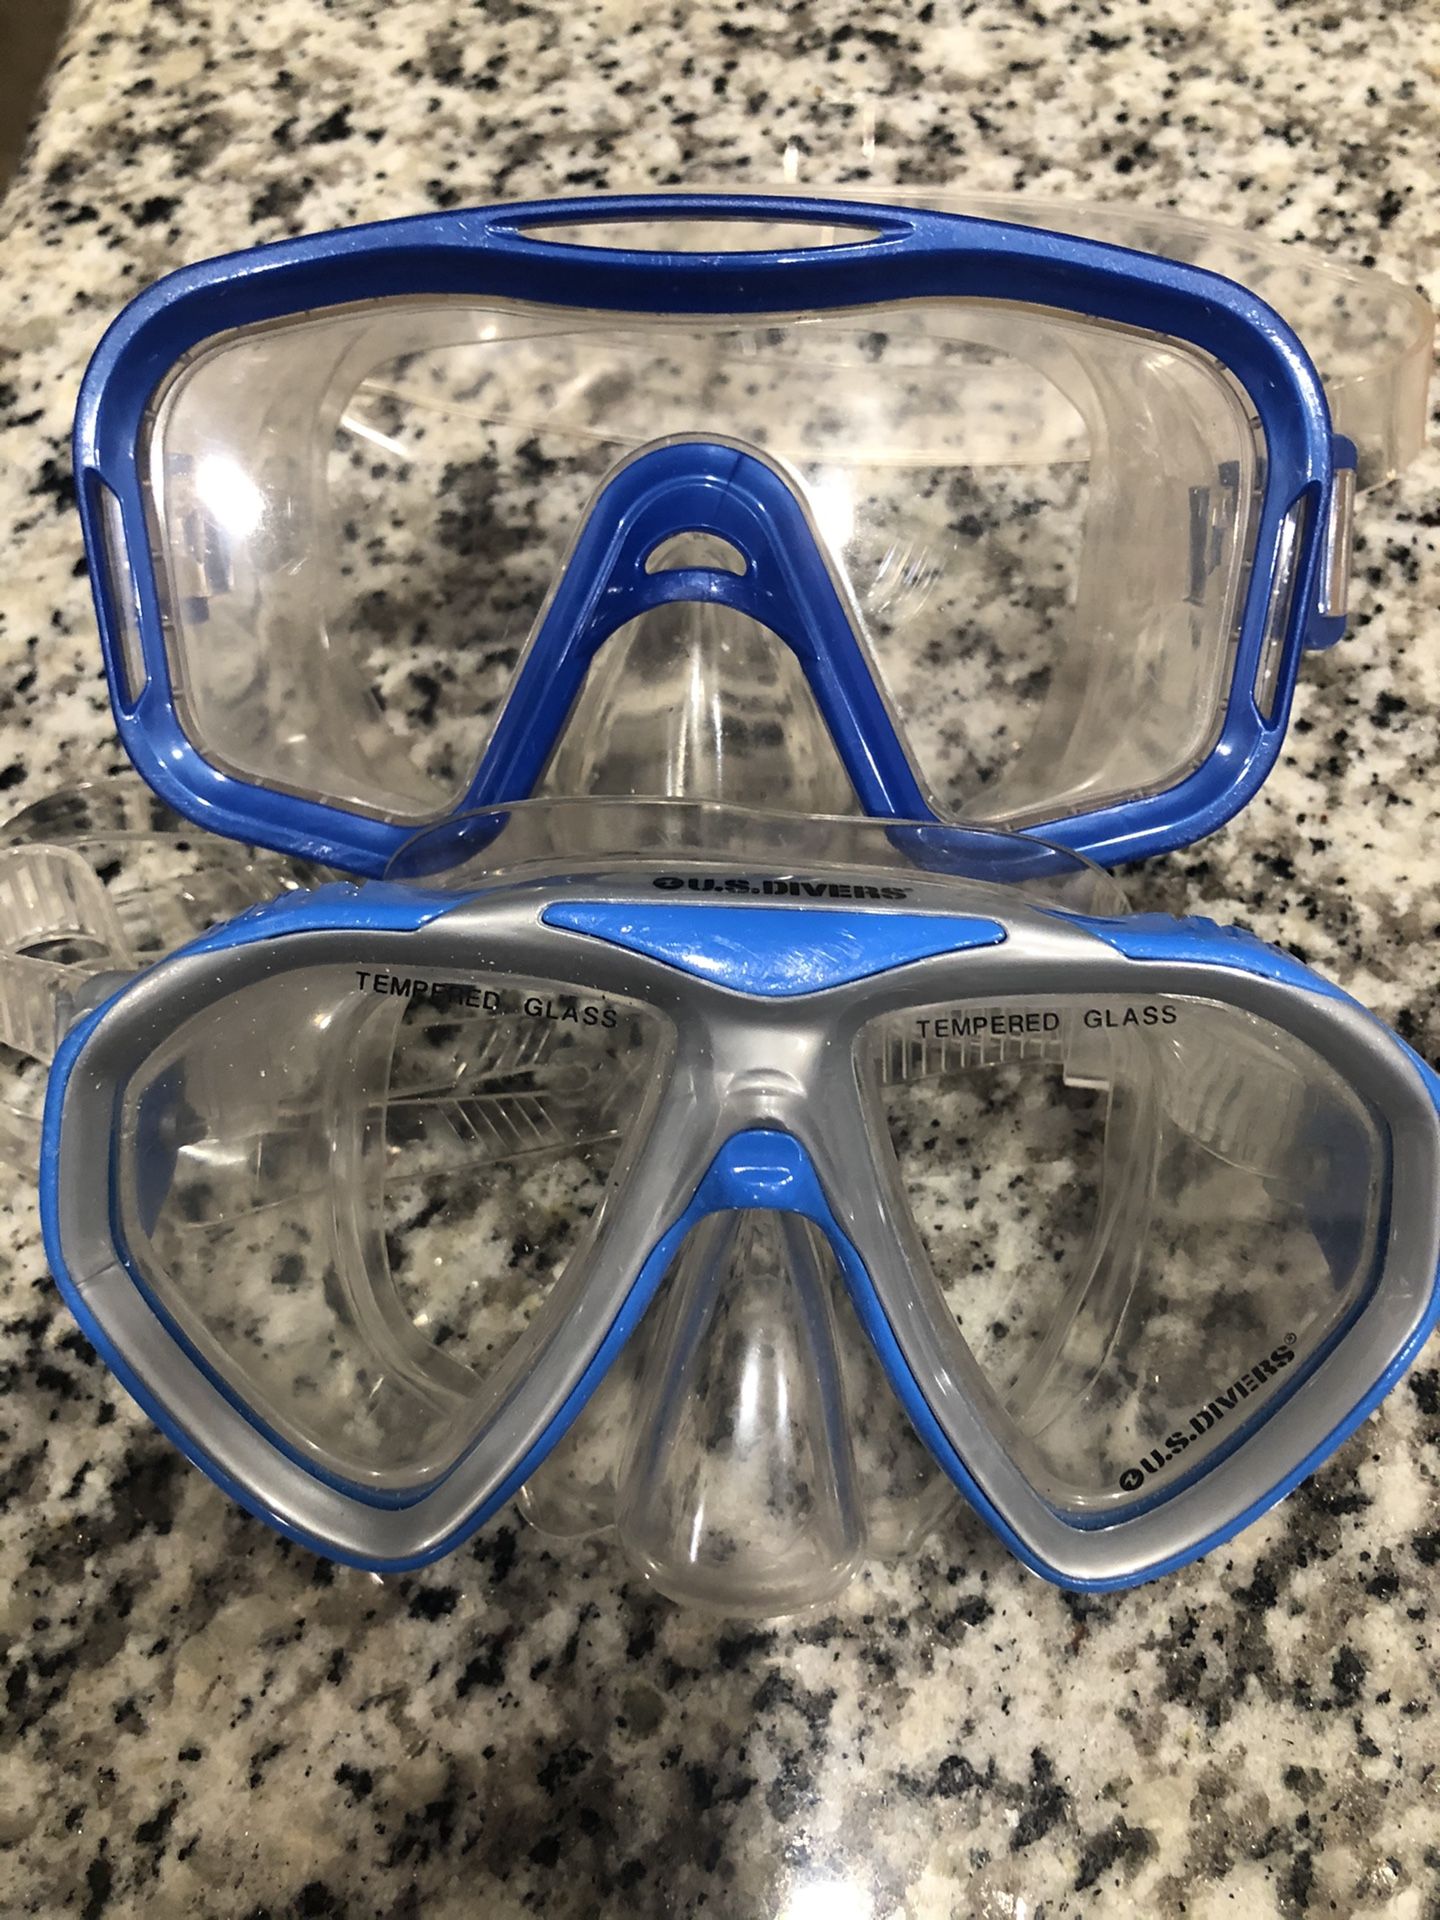 Two Goggle Water Masks